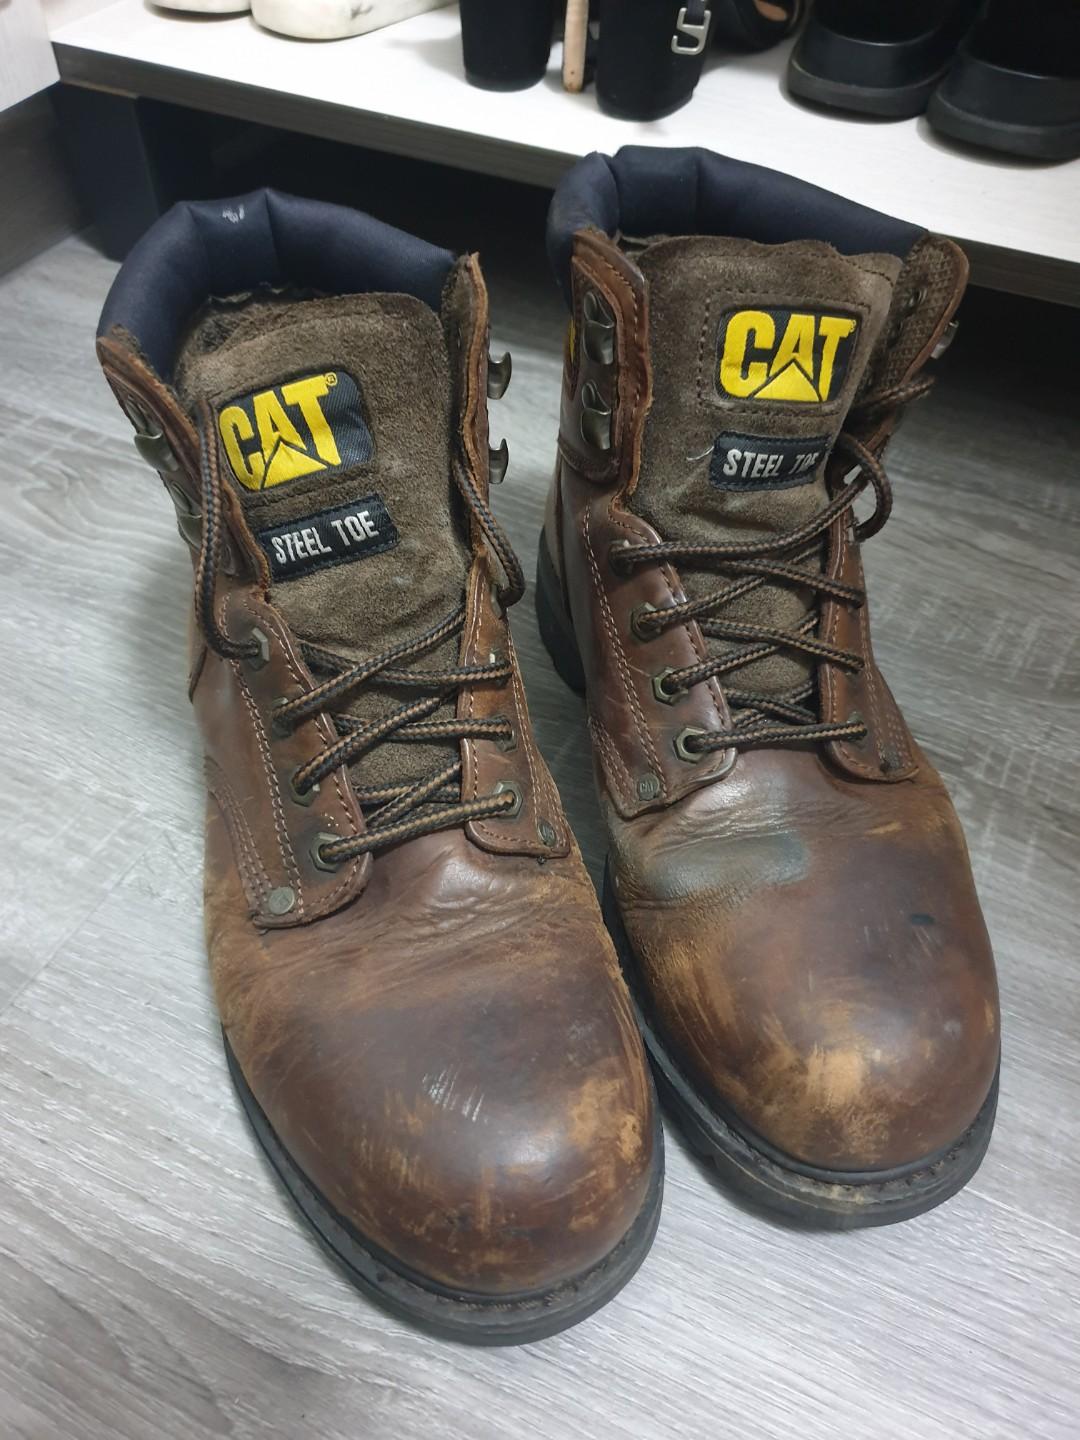 Caterpillar Safety Shoes (STEEL TOE 